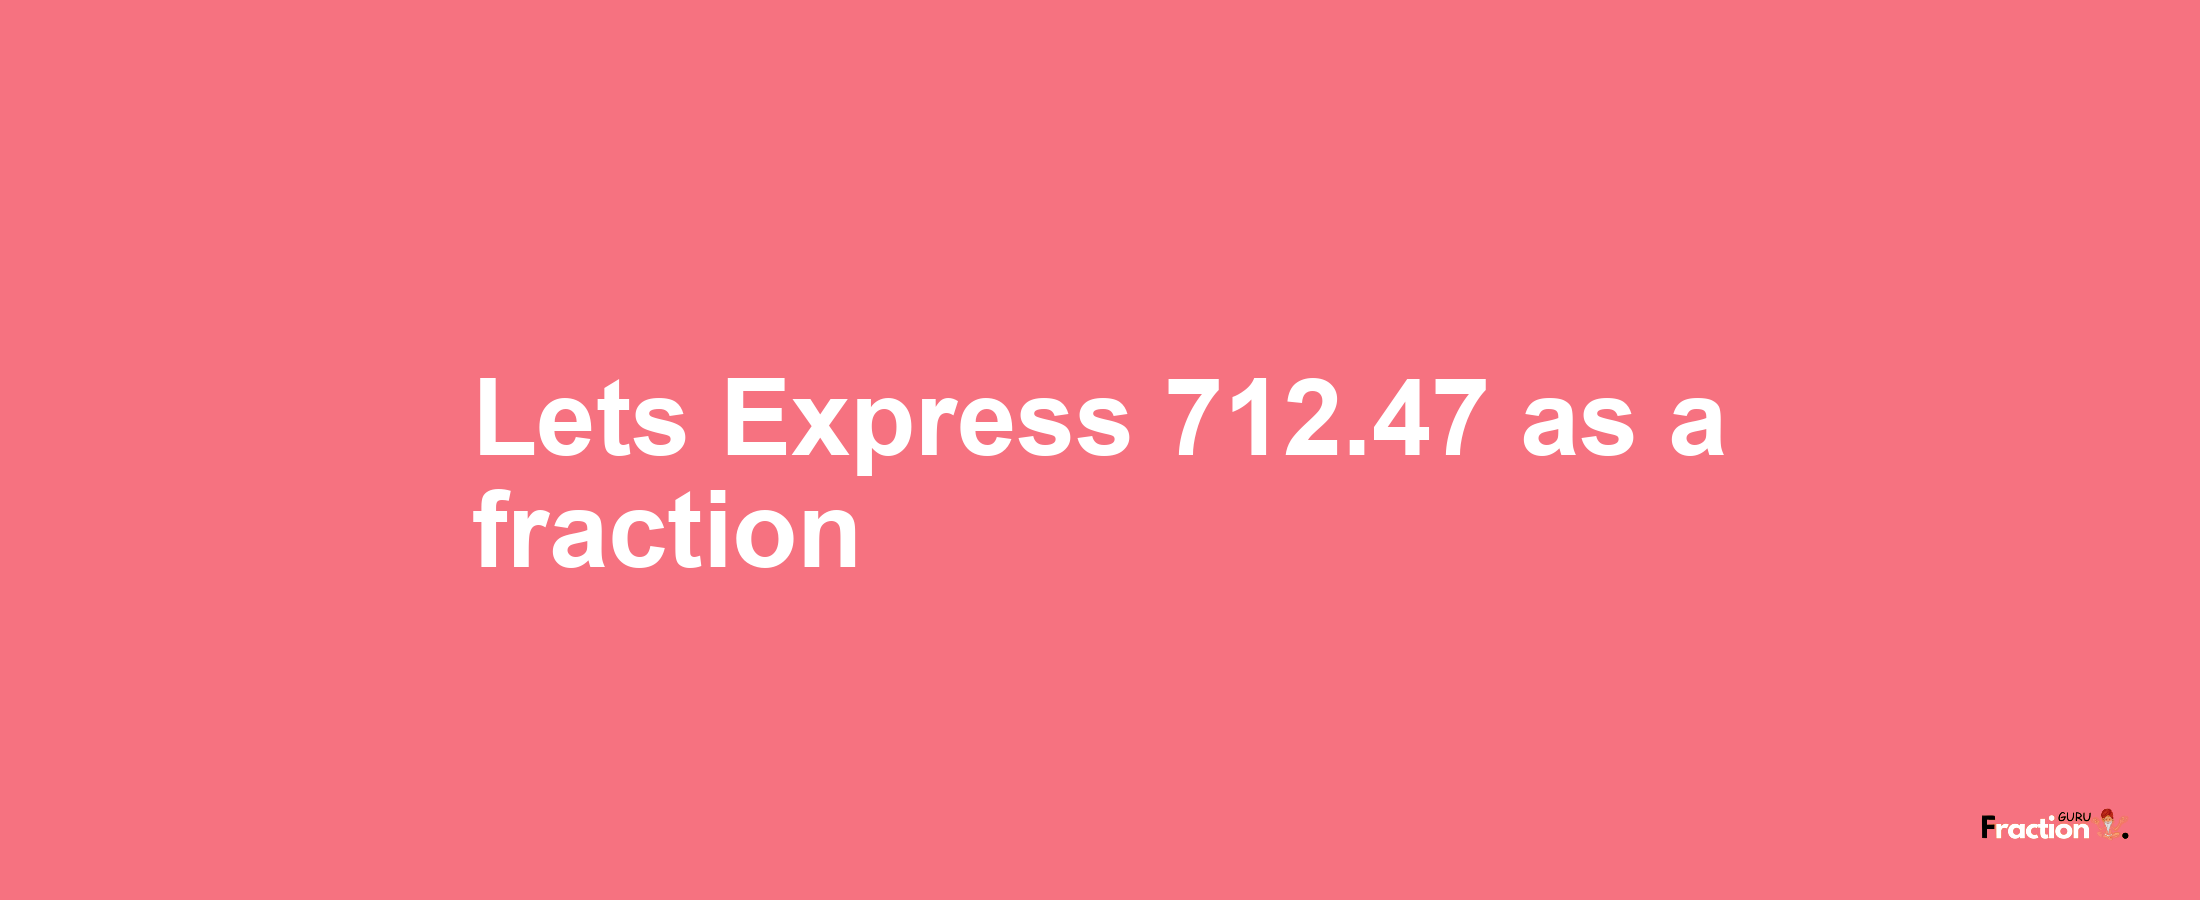 Lets Express 712.47 as afraction